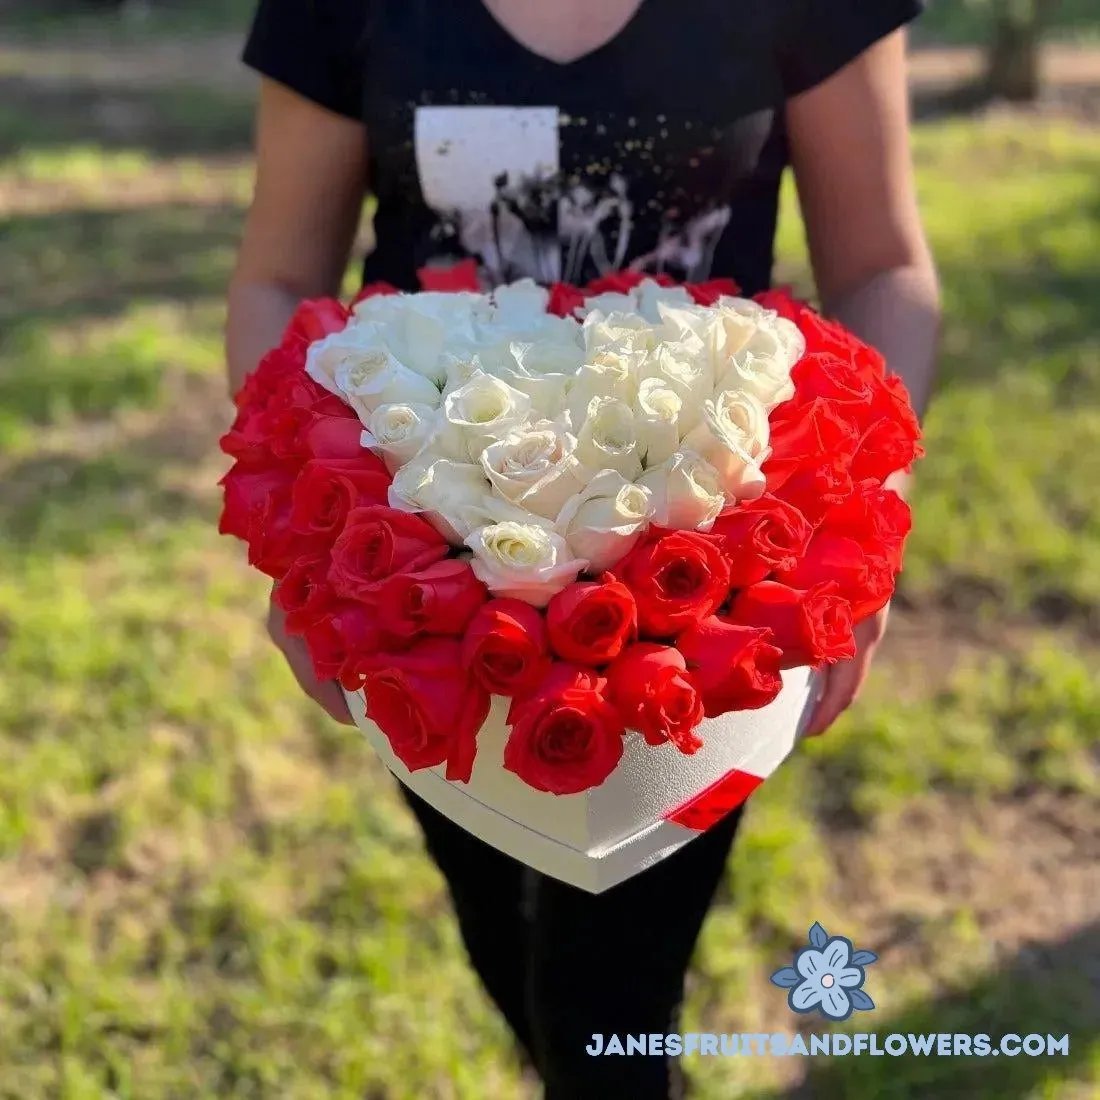 3D Heart Amour Bouquet - Jane's Fruits And Flowers